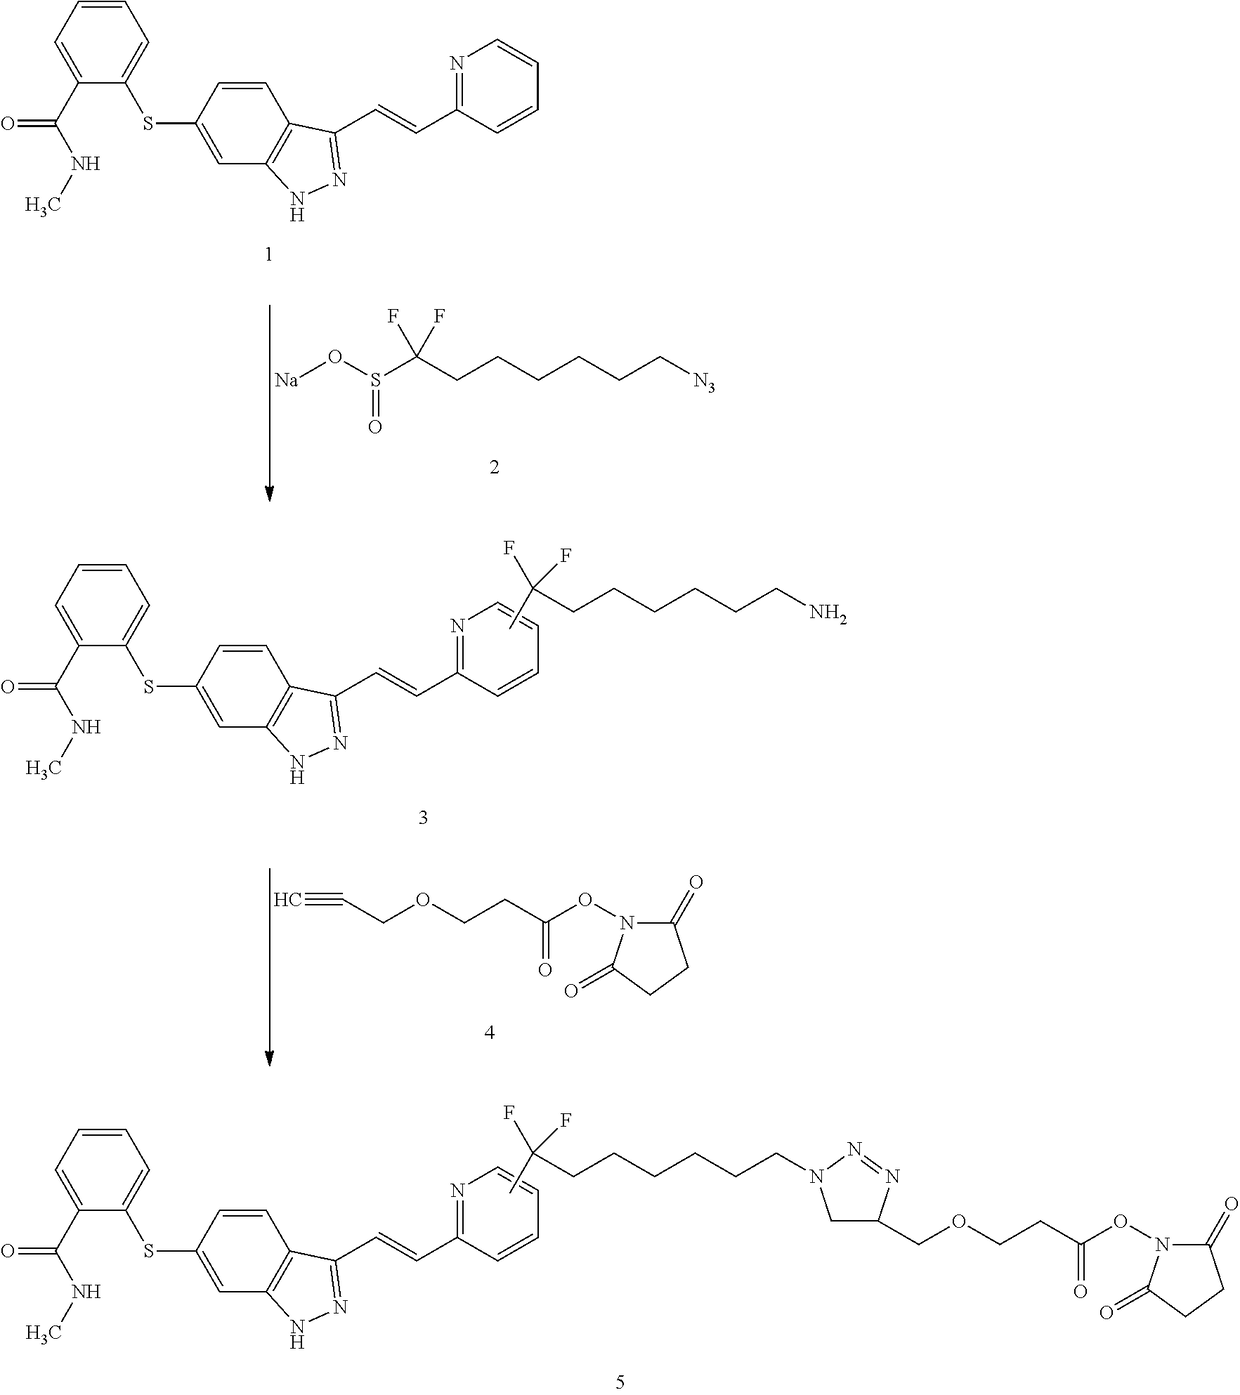 Labeling Reagent Containing A Molecularly Targeted Drug